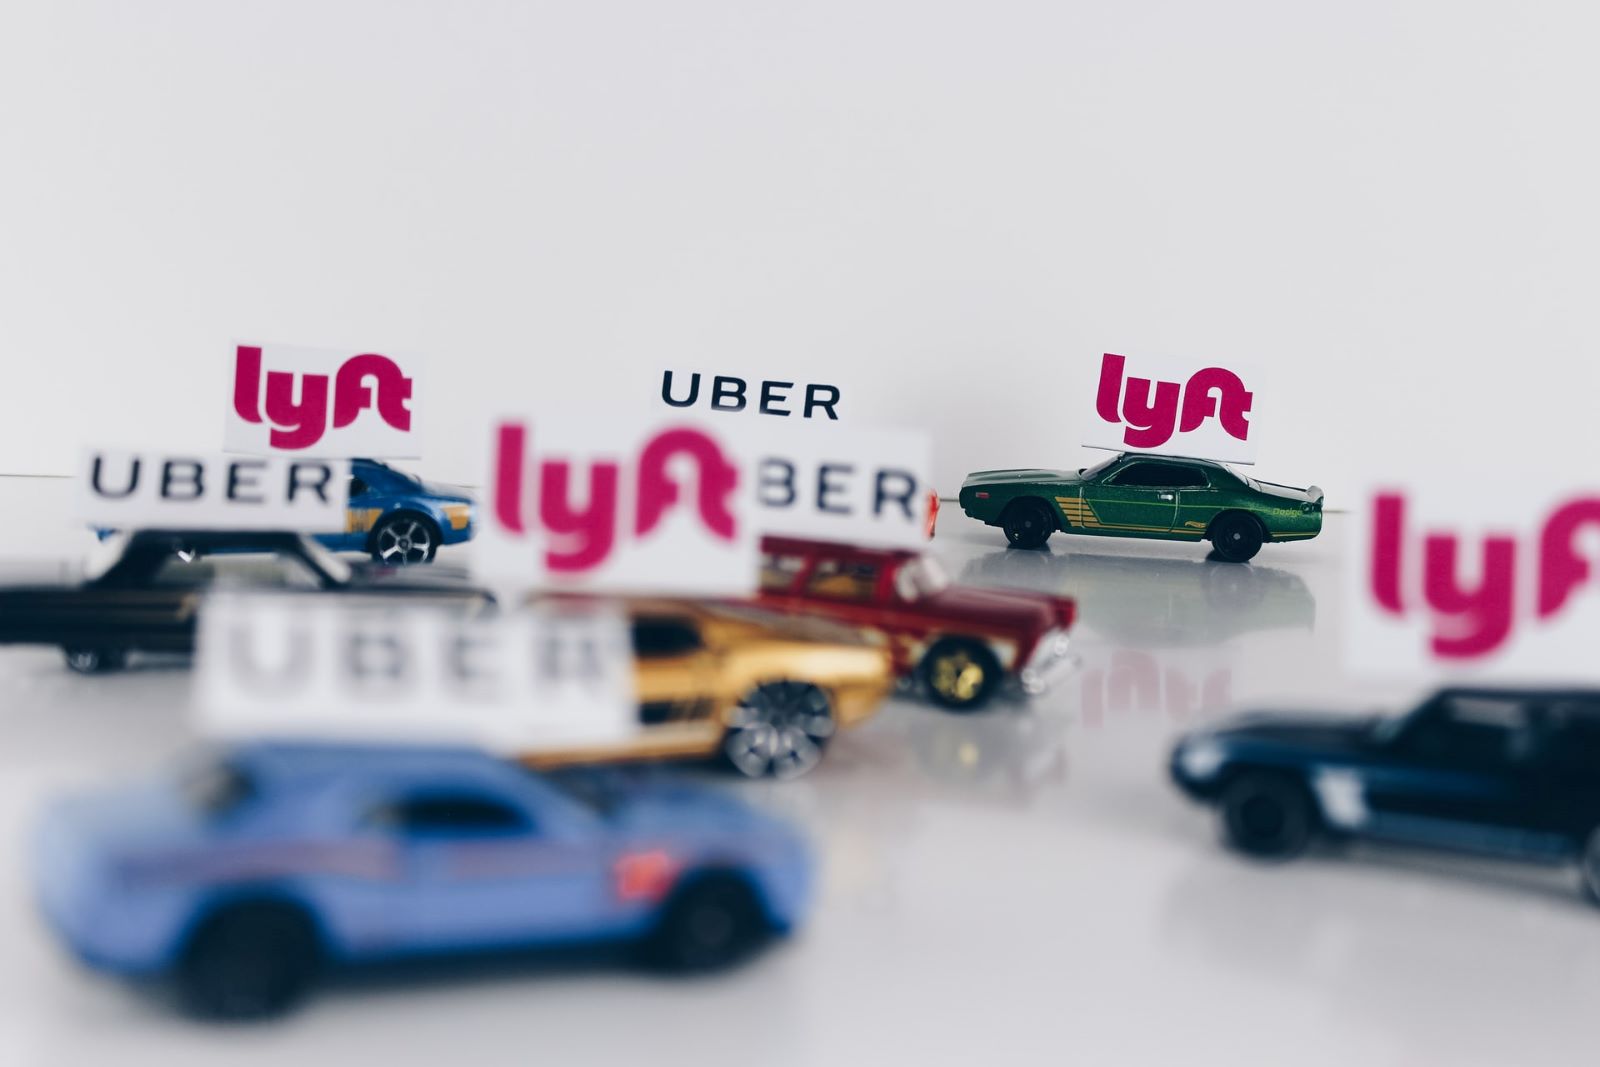 Set of toy cars collected on a flat surface. Each of the toy cars has either an Uber or Lyft sign on it